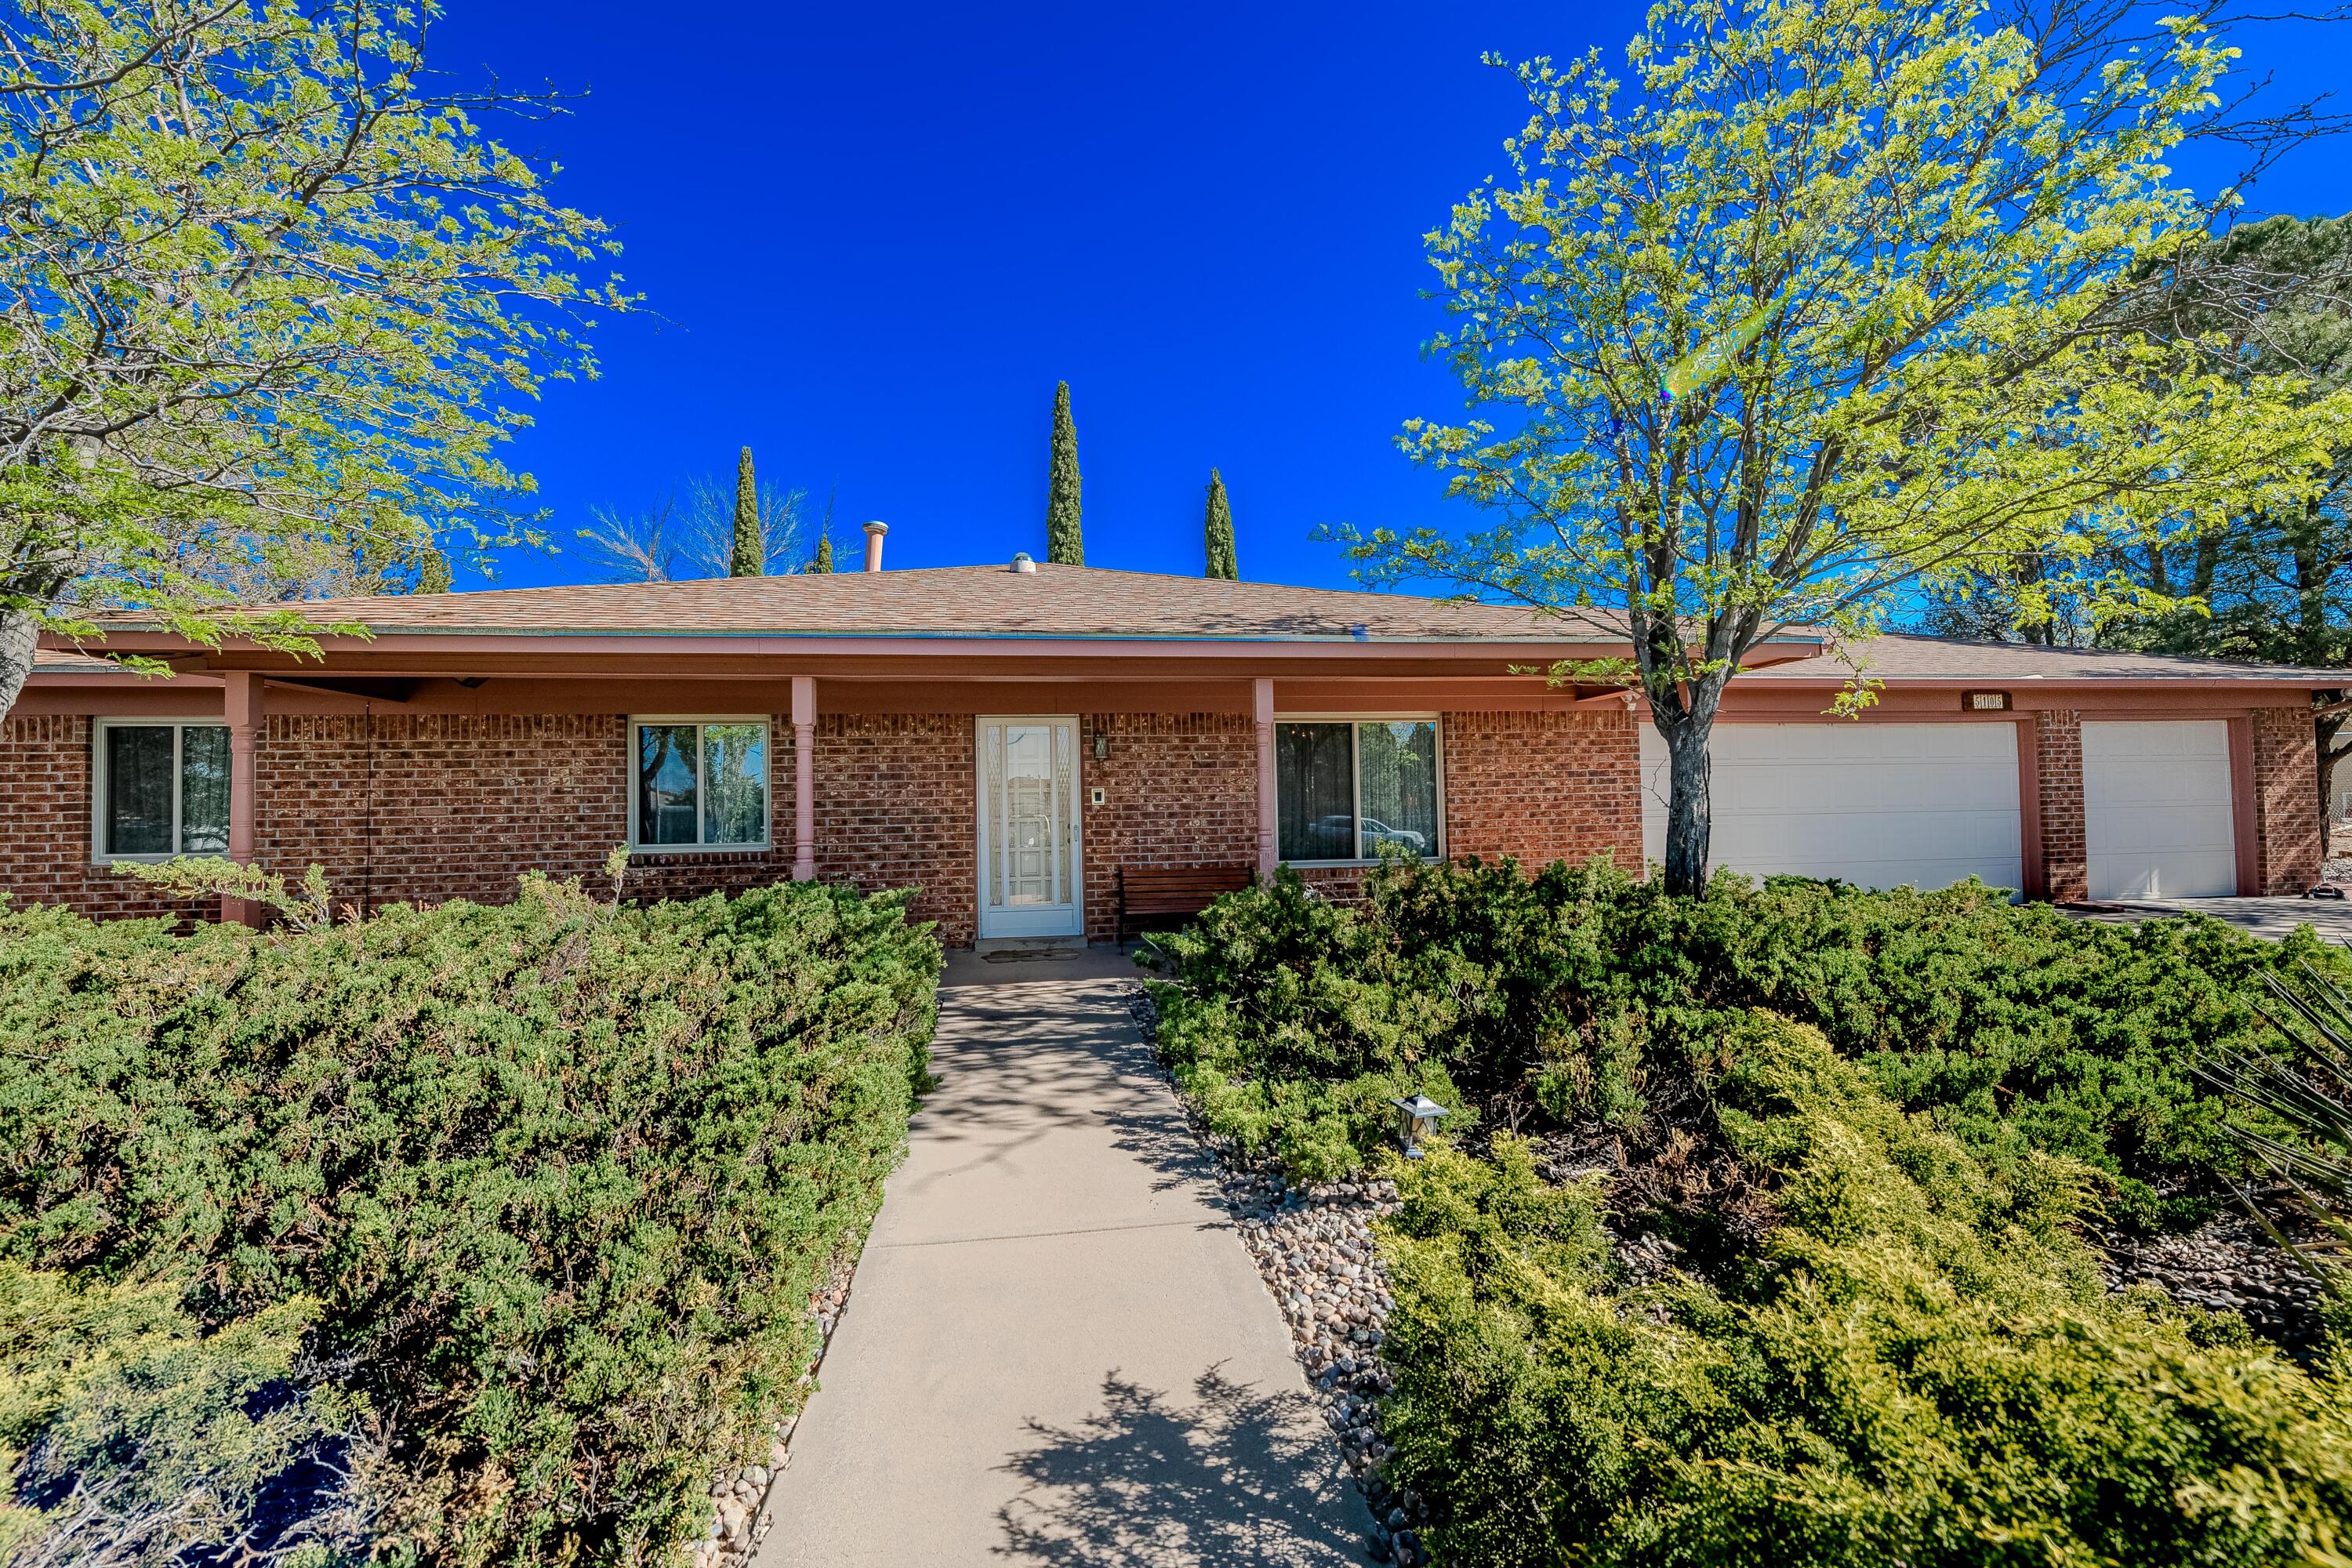 5105 Justin Drive NW, Albuquerque, New Mexico 87114, 3 Bedrooms Bedrooms, ,2 BathroomsBathrooms,Residential,For Sale,5105 Justin Drive NW,1061521